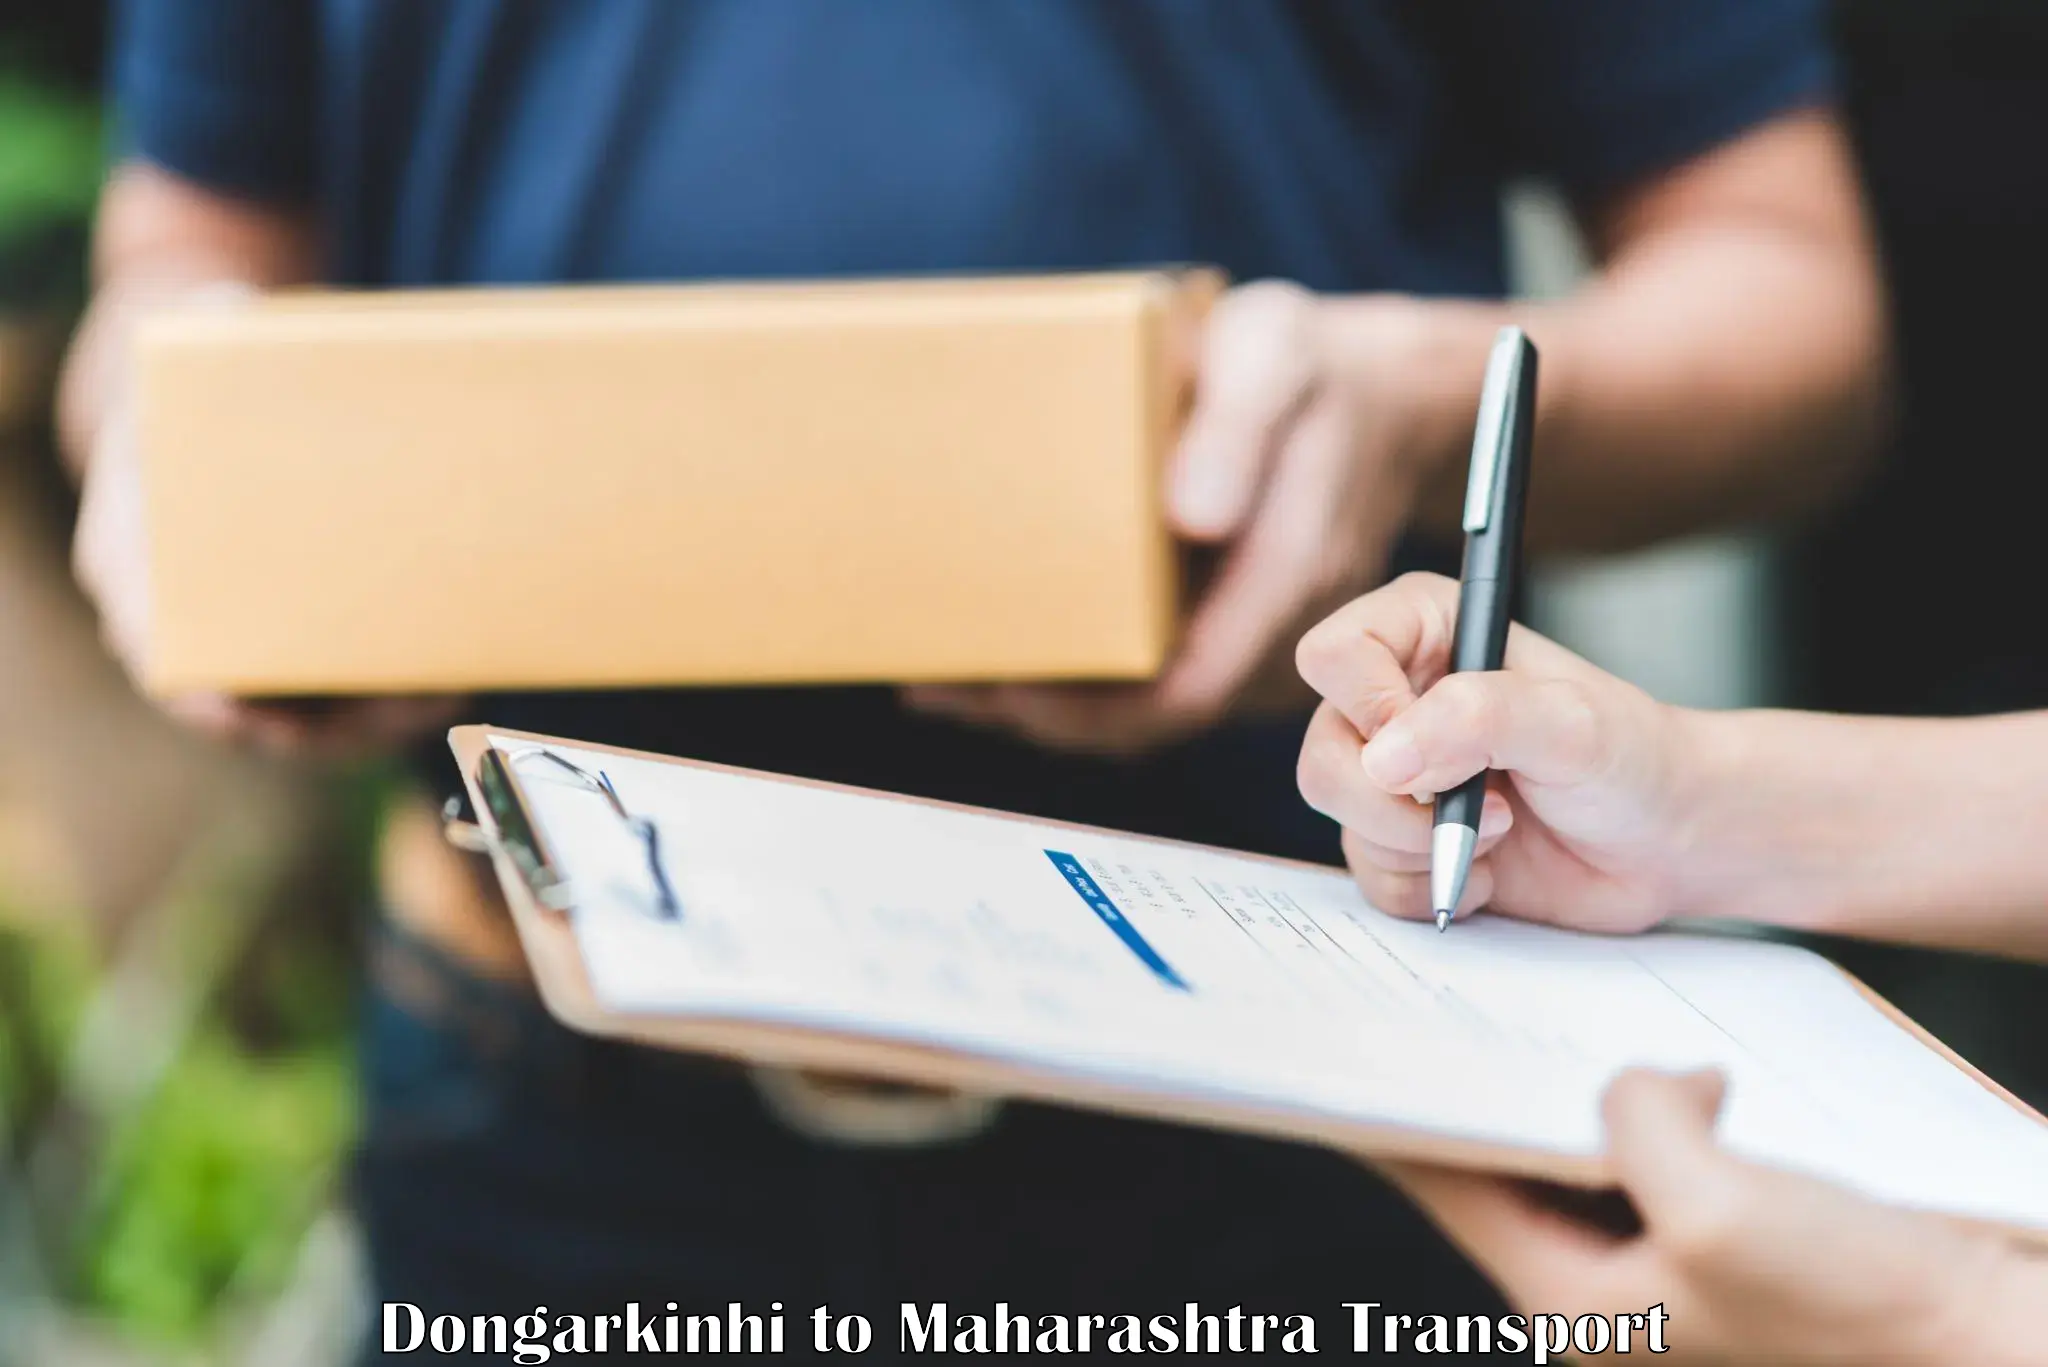 Commercial transport service Dongarkinhi to Ambajogai